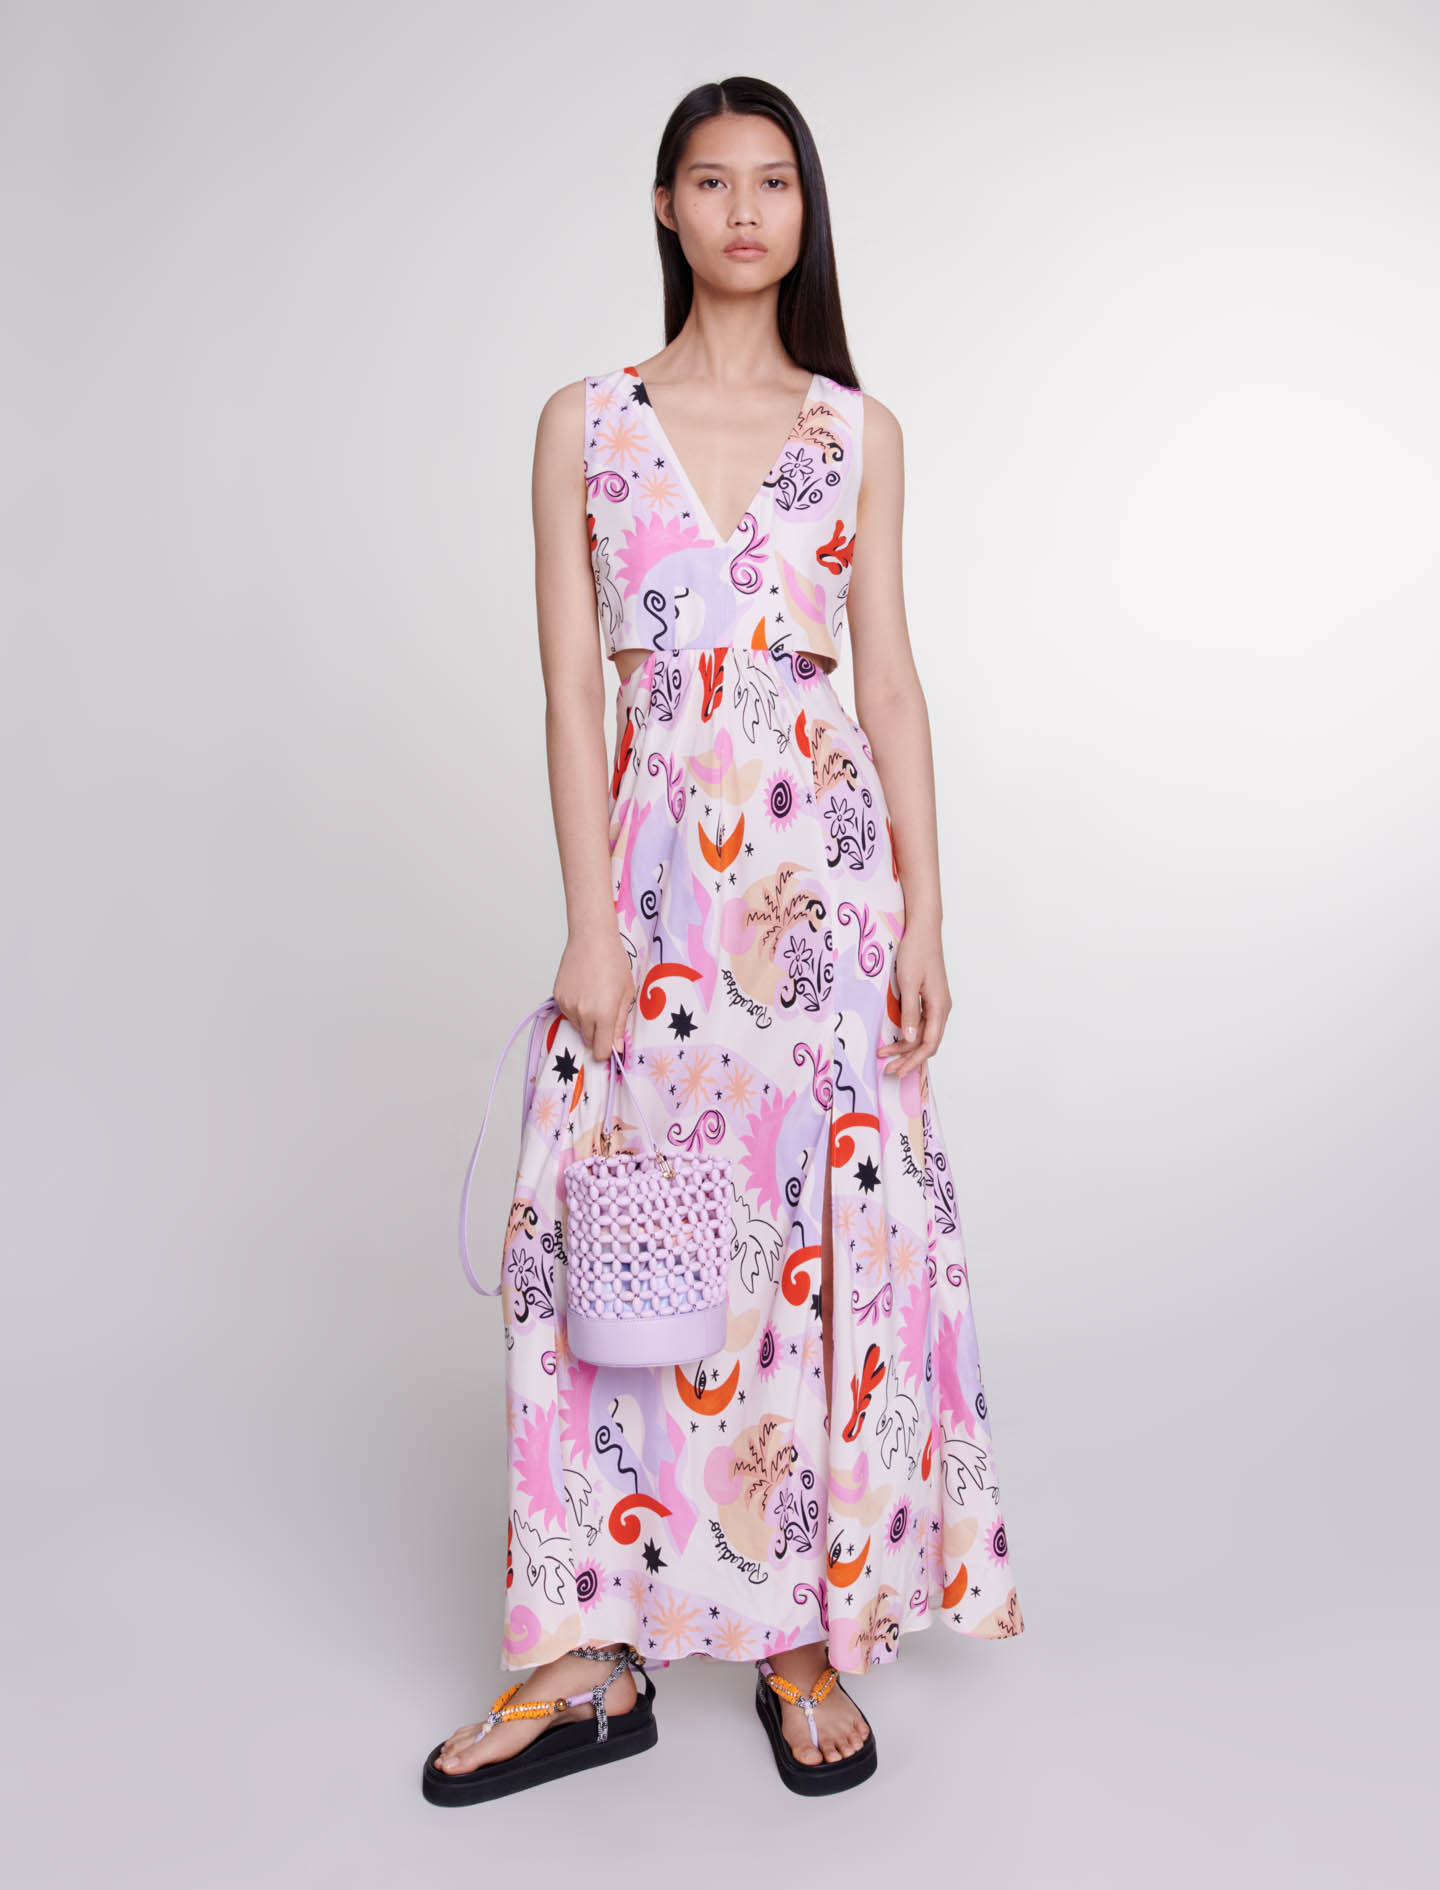 Maje Woman's silk Buttons: Cutaway silk maxi dress for Spring/Summer, in color Print paradisio /